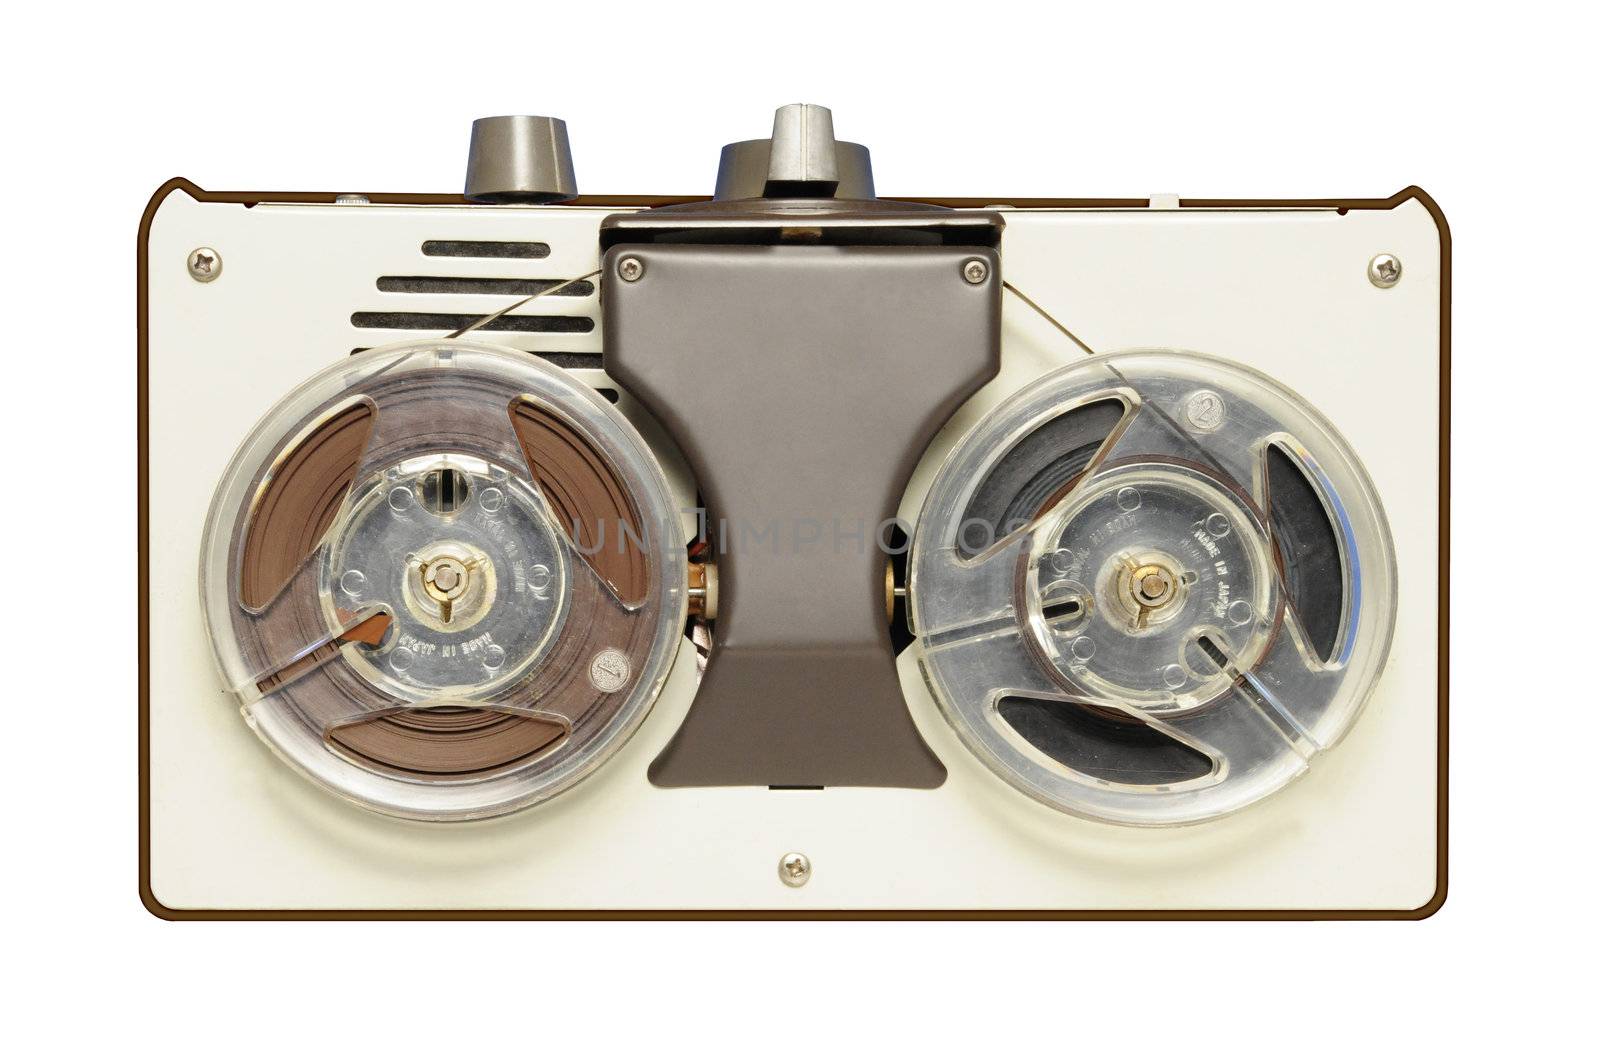 Vintage reel-to-reel tape recorder circa 1967, AIWA brand, made in Japan. Brandname has been removed from photo.